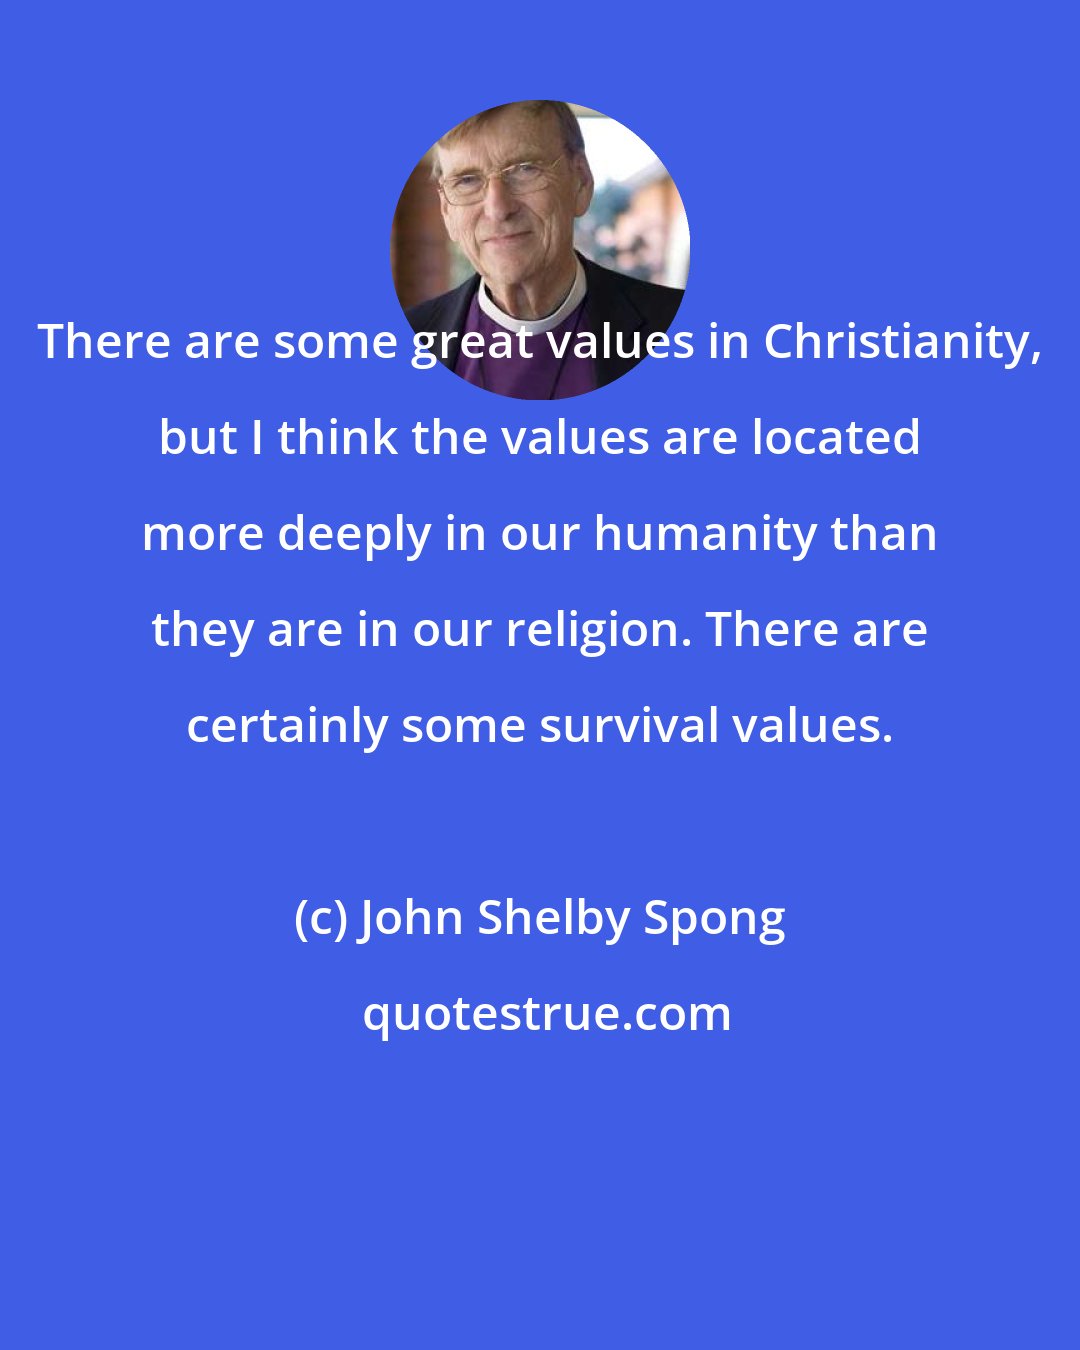 John Shelby Spong: There are some great values in Christianity, but I think the values are located more deeply in our humanity than they are in our religion. There are certainly some survival values.